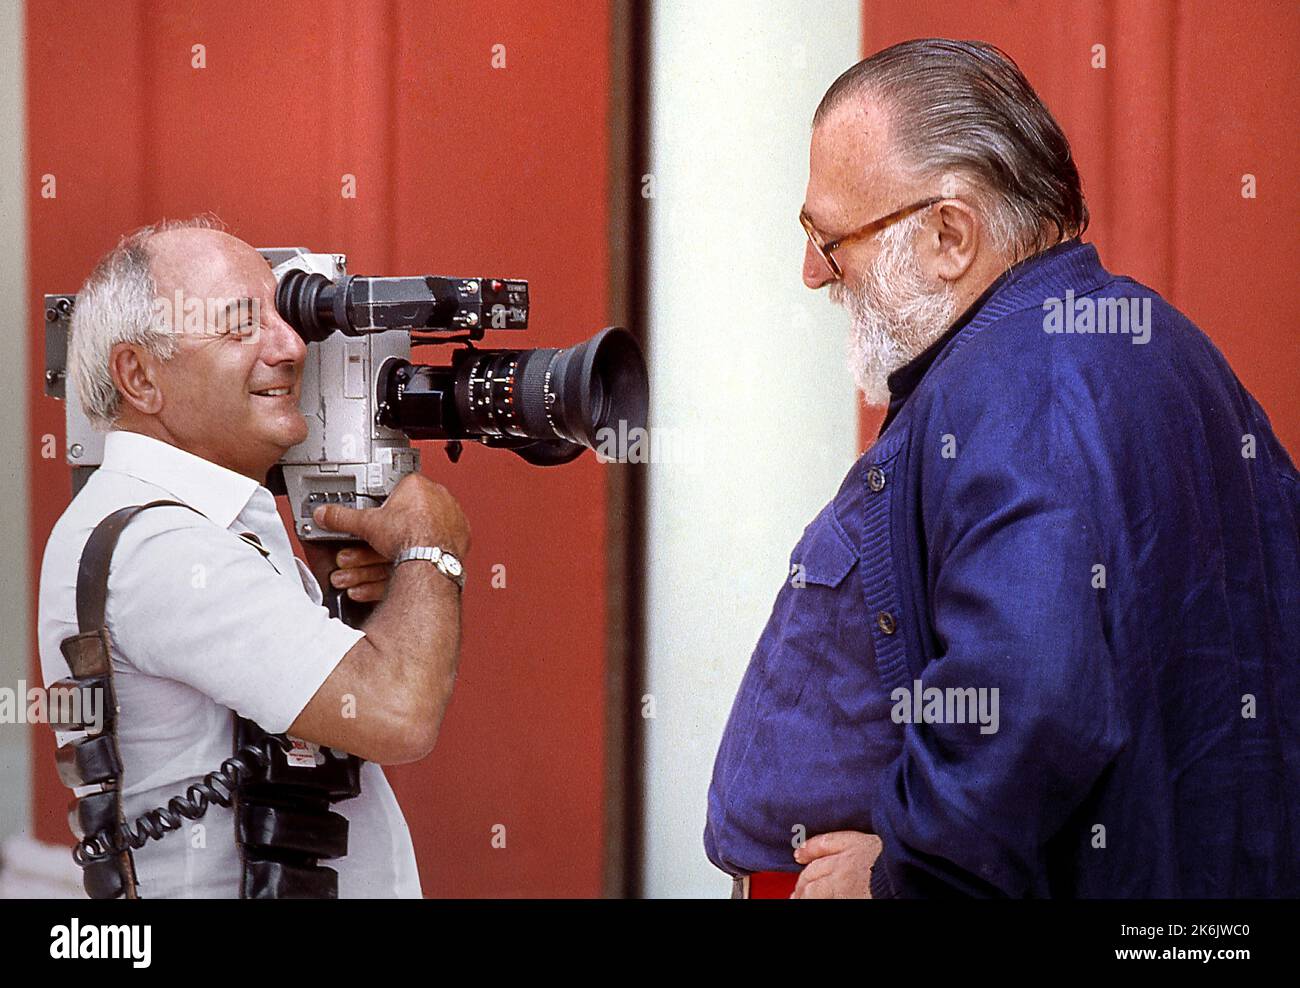 Director Sergio Leone with director of photography Tonino Delli Colli photographed in Venice (Italy) in 1984 Sergio Leone - The Italian who invented America, Produced by Sky Studios and Sky Italia with Leone Film Group, the company managed by Sergio's children, the documentary offers, in addition to that of Miller, testimonies of characters such as Clint Eastwood, Robert De Niro, Martin Scorsese, Steven Spielberg, Jennifer Connelly, Quentin Tarantino, Giuseppe Tornatore, Darren Aronofsky, Ennio Morricone, Carlo Verdone, Damien Chazelle, Eli Wallach, Arnon Milchan, Jacques Audiard, Tsui Hark, D Stock Photo